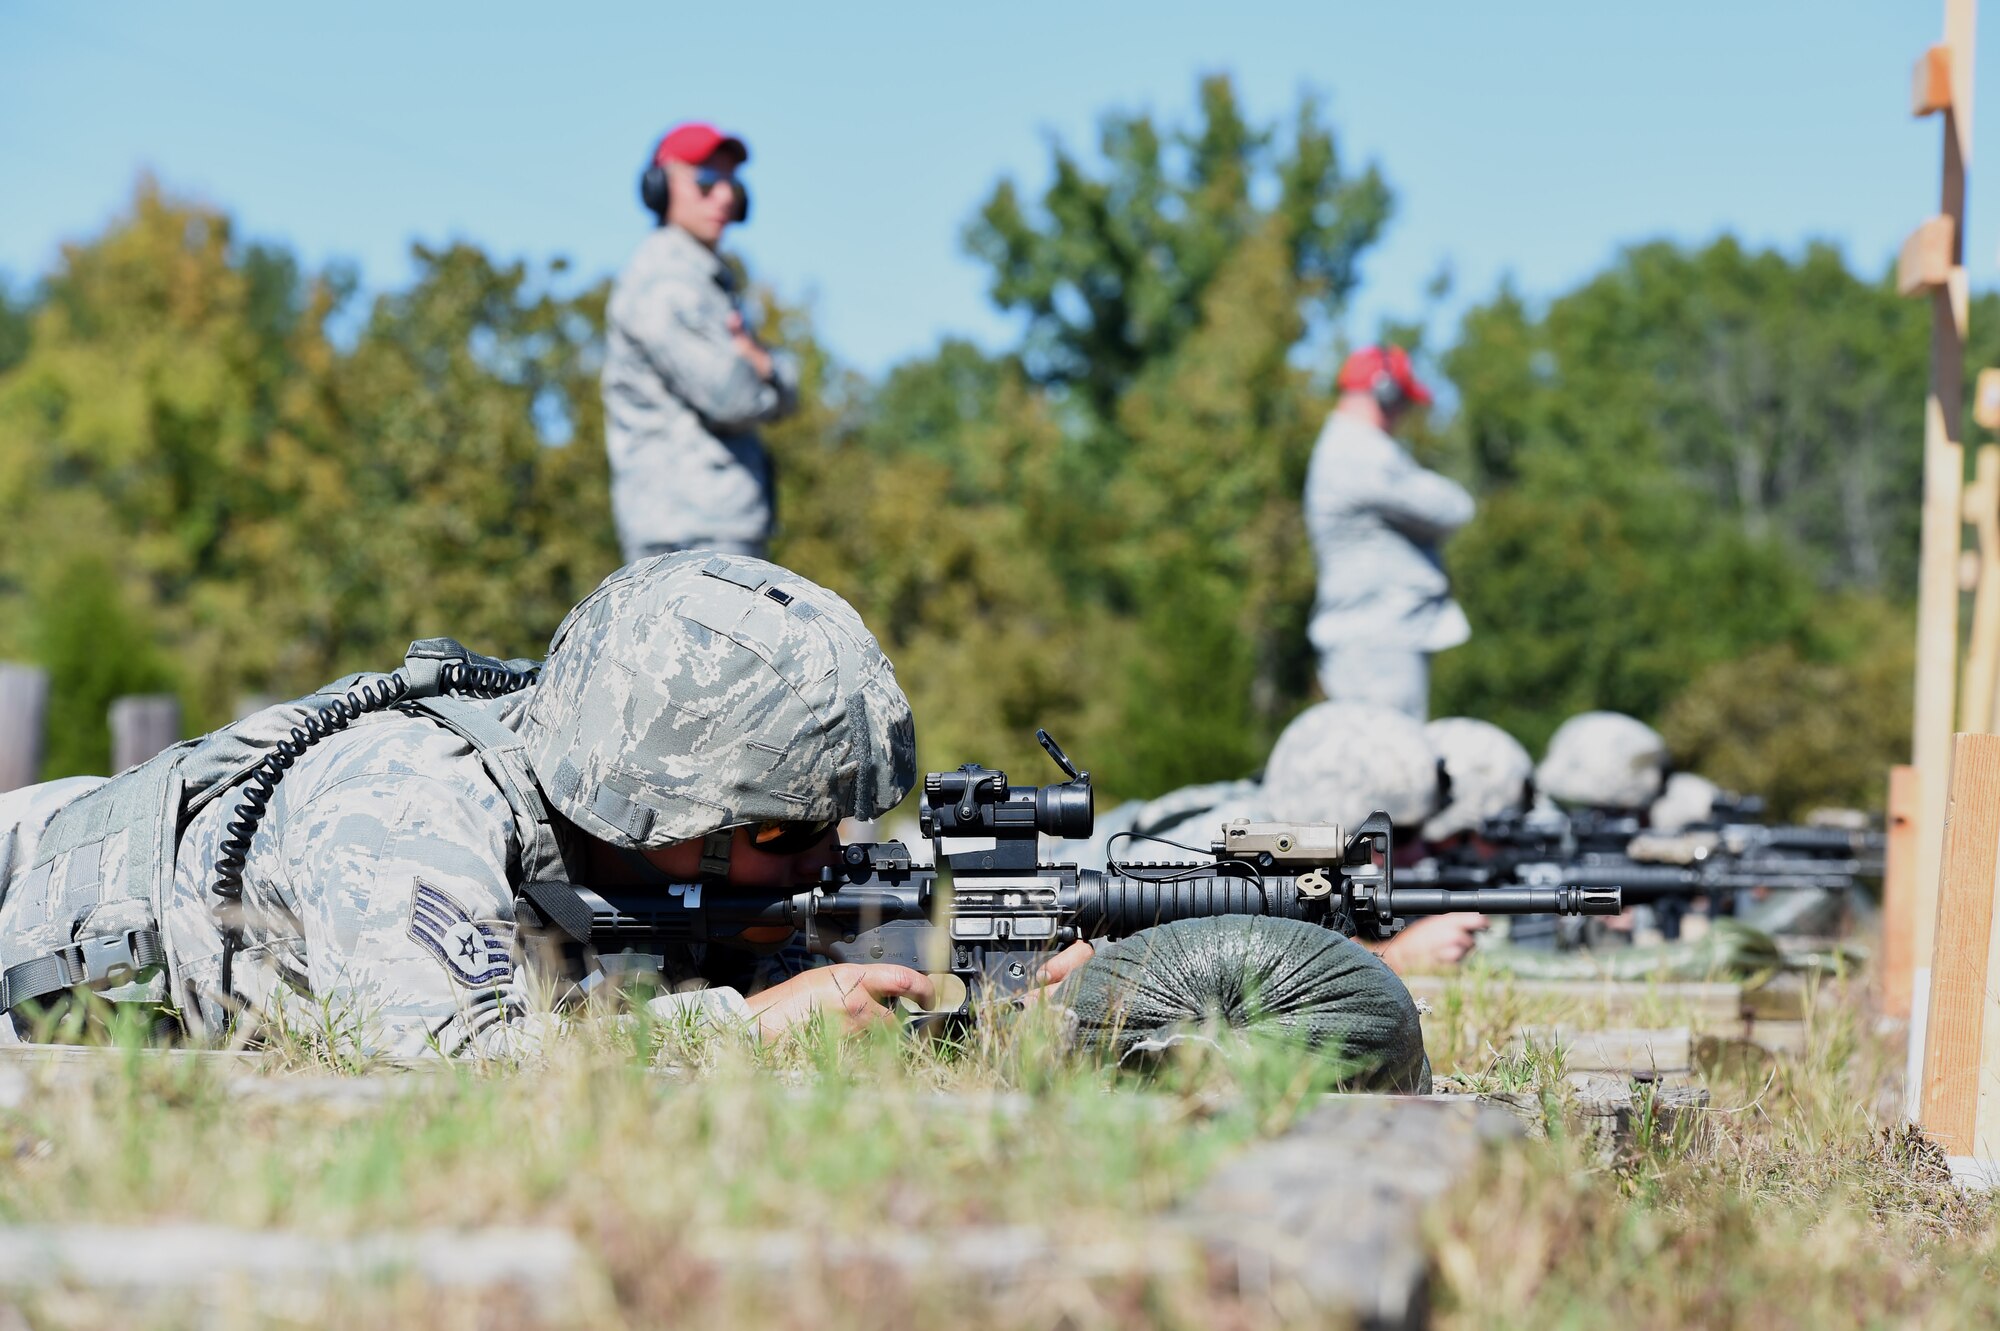 Staff Sgt. Nathanael Stewart, 188th Security Forces specialist, and other members of the 188th SFS fire at their targets Oct. 3, 2015 during weapons training on the M4 carbine rifle at Fort Chaffee Joint Maneuver Training Center, Ark. Marksmanship training helps to ensure SFS Airman remain proficient with their service weapons.   (U.S. Air National Guard photo by Senior Airman Cody Martin/Released)